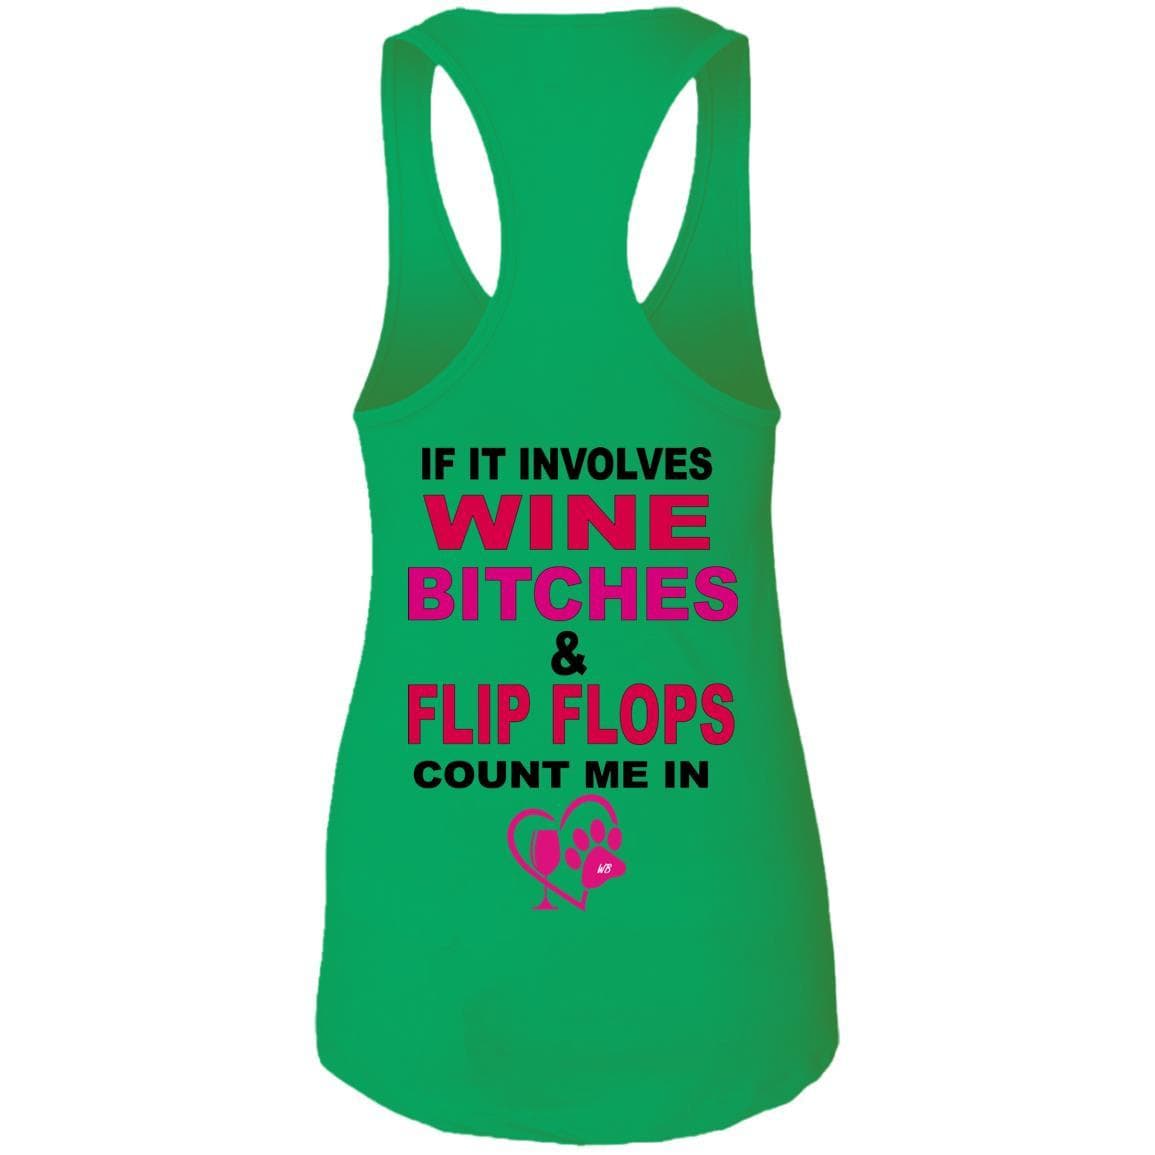 T-Shirts WineyBitches.co Hilariously Funny Tank Top for Wine & Dog Lovers WineyBitchesCo